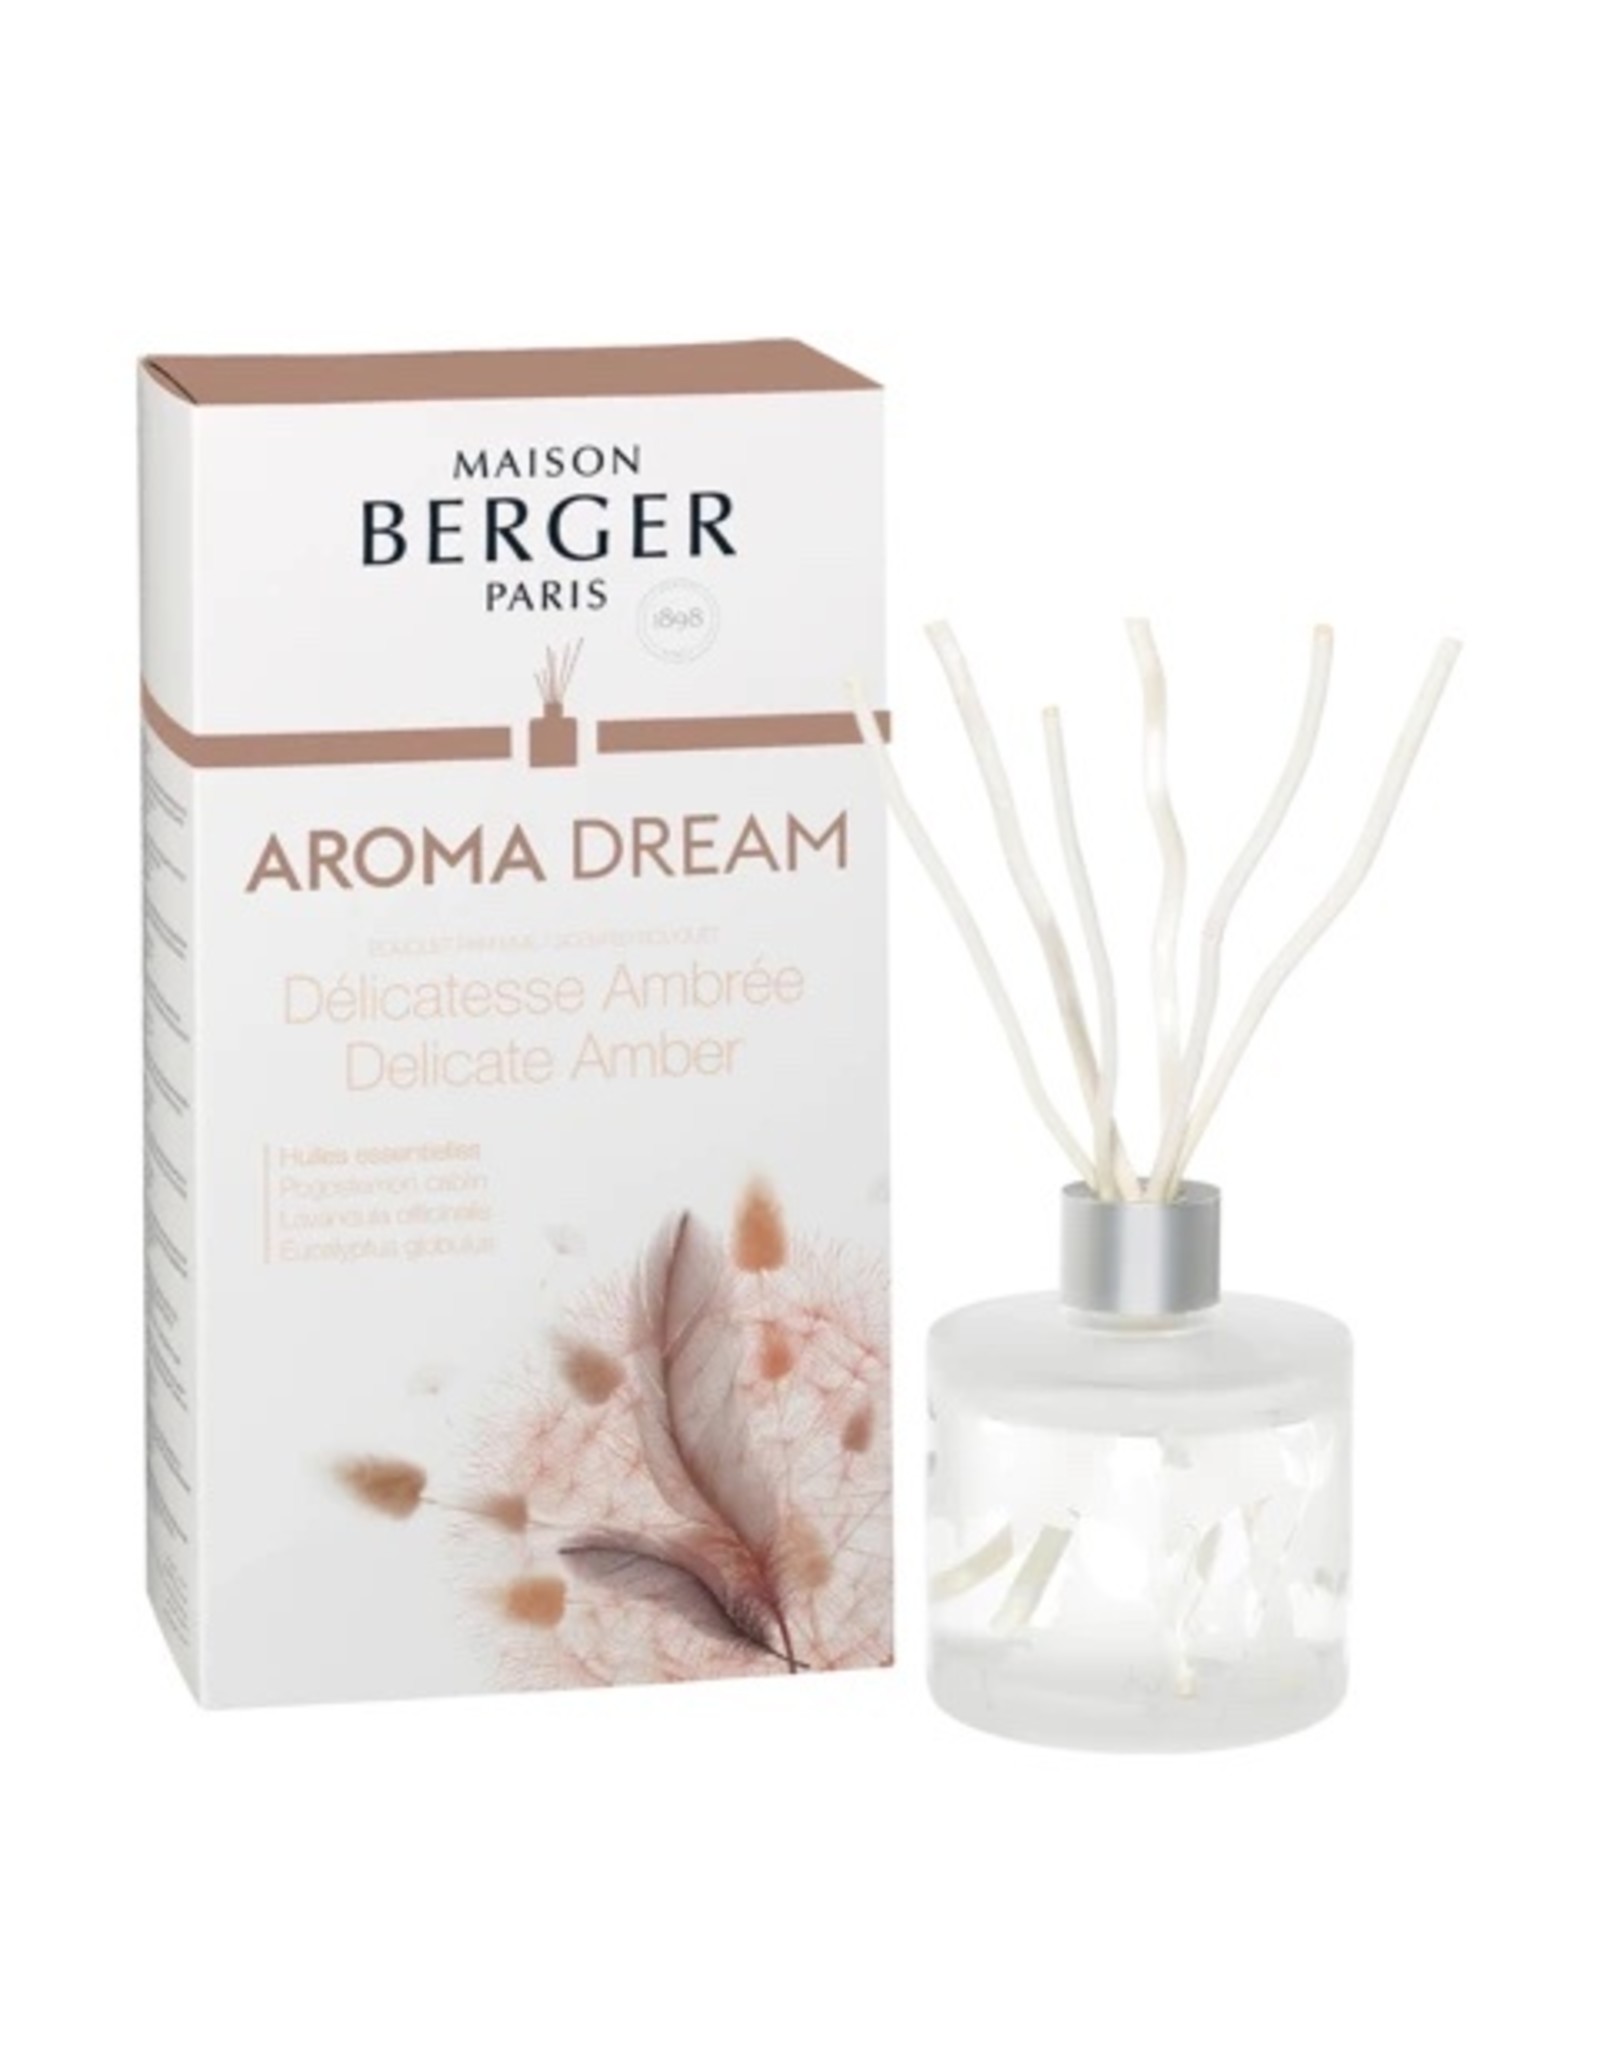 Maison Berger Aroma Dream Pre-filled Reed Diffuser- Delicate Amber